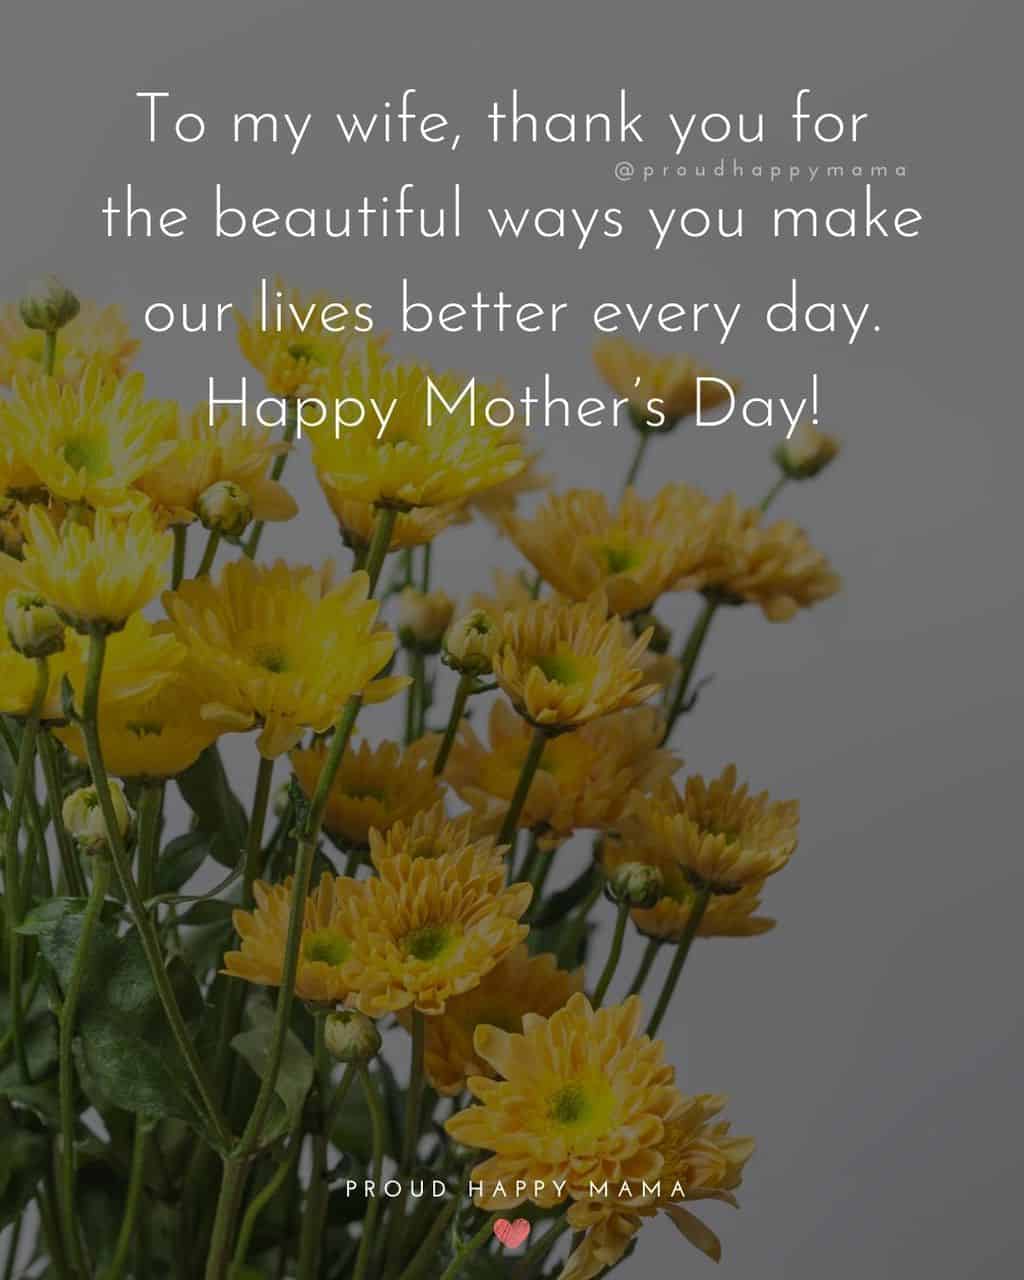 Happy Mothers Day Quotes For Wife - To my wife, thank you for the beautiful ways you make our lives better every day. Happy